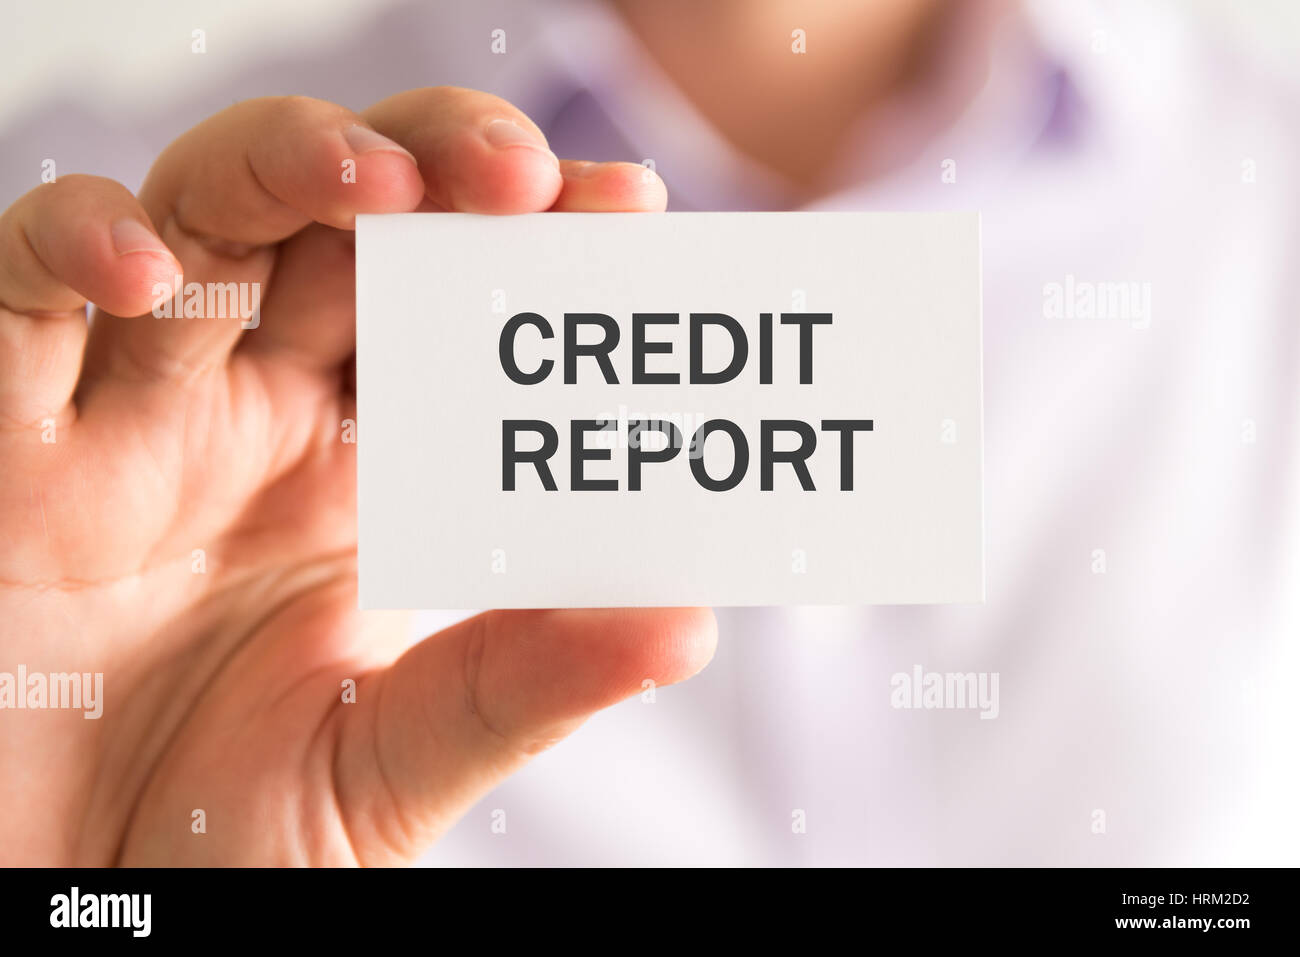 Closeup on businessman holding a card with CREDIT REPORT message, business concept image with soft focus background Stock Photo